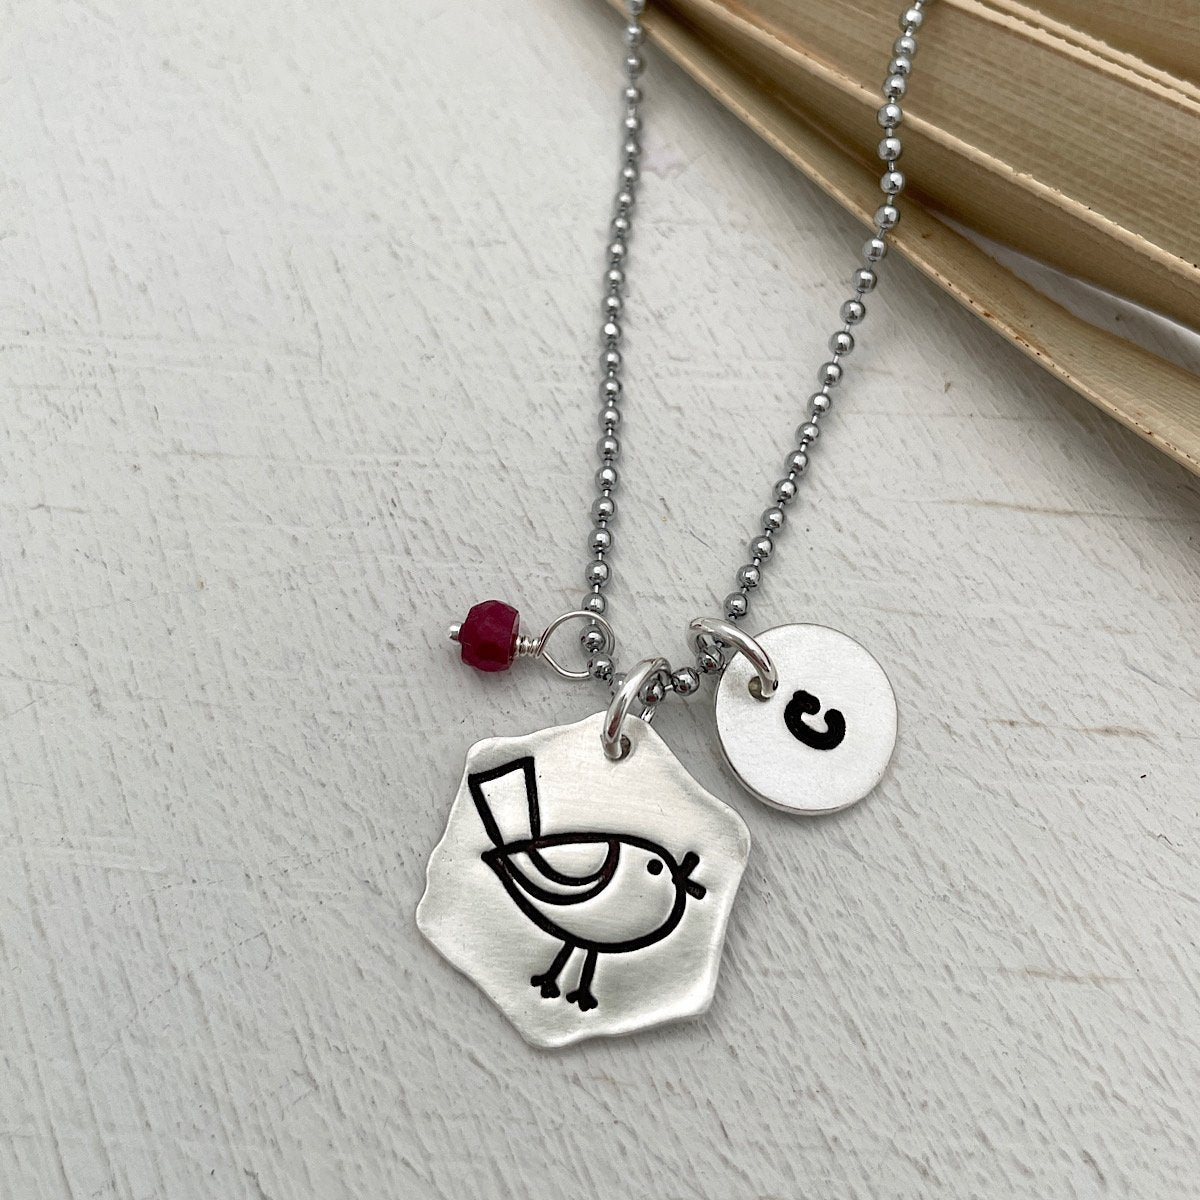 Girls Build Your Own Charm Necklace